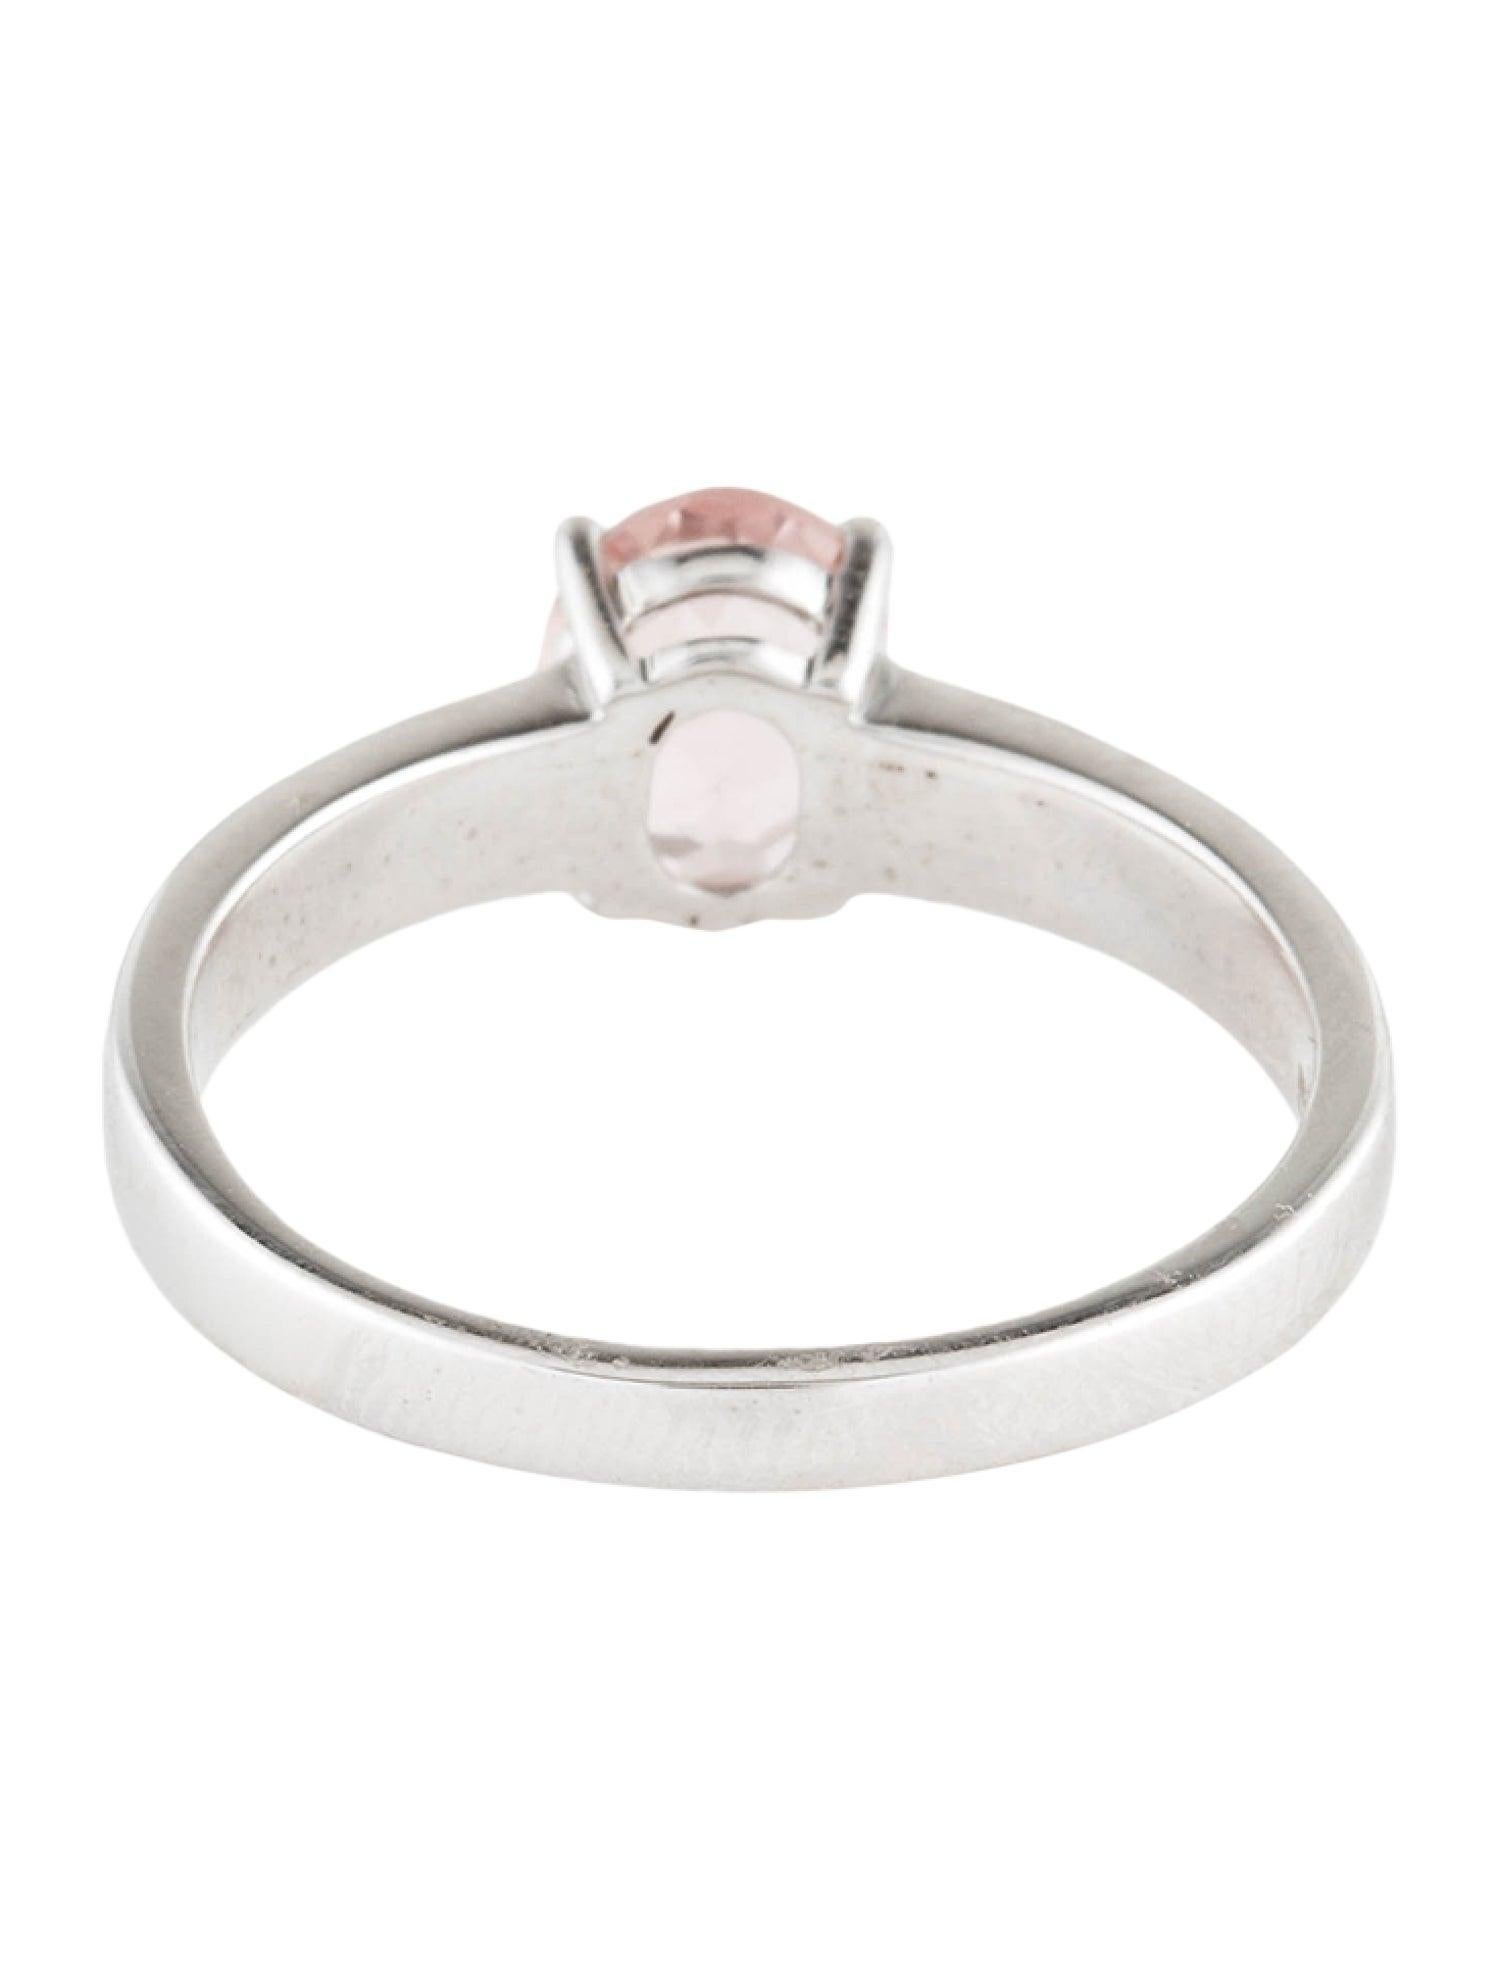 Elegant 14K White Gold Oval Morganite Cocktail Ring, 0.99 Carat, Size 7.75 In New Condition For Sale In Holtsville, NY